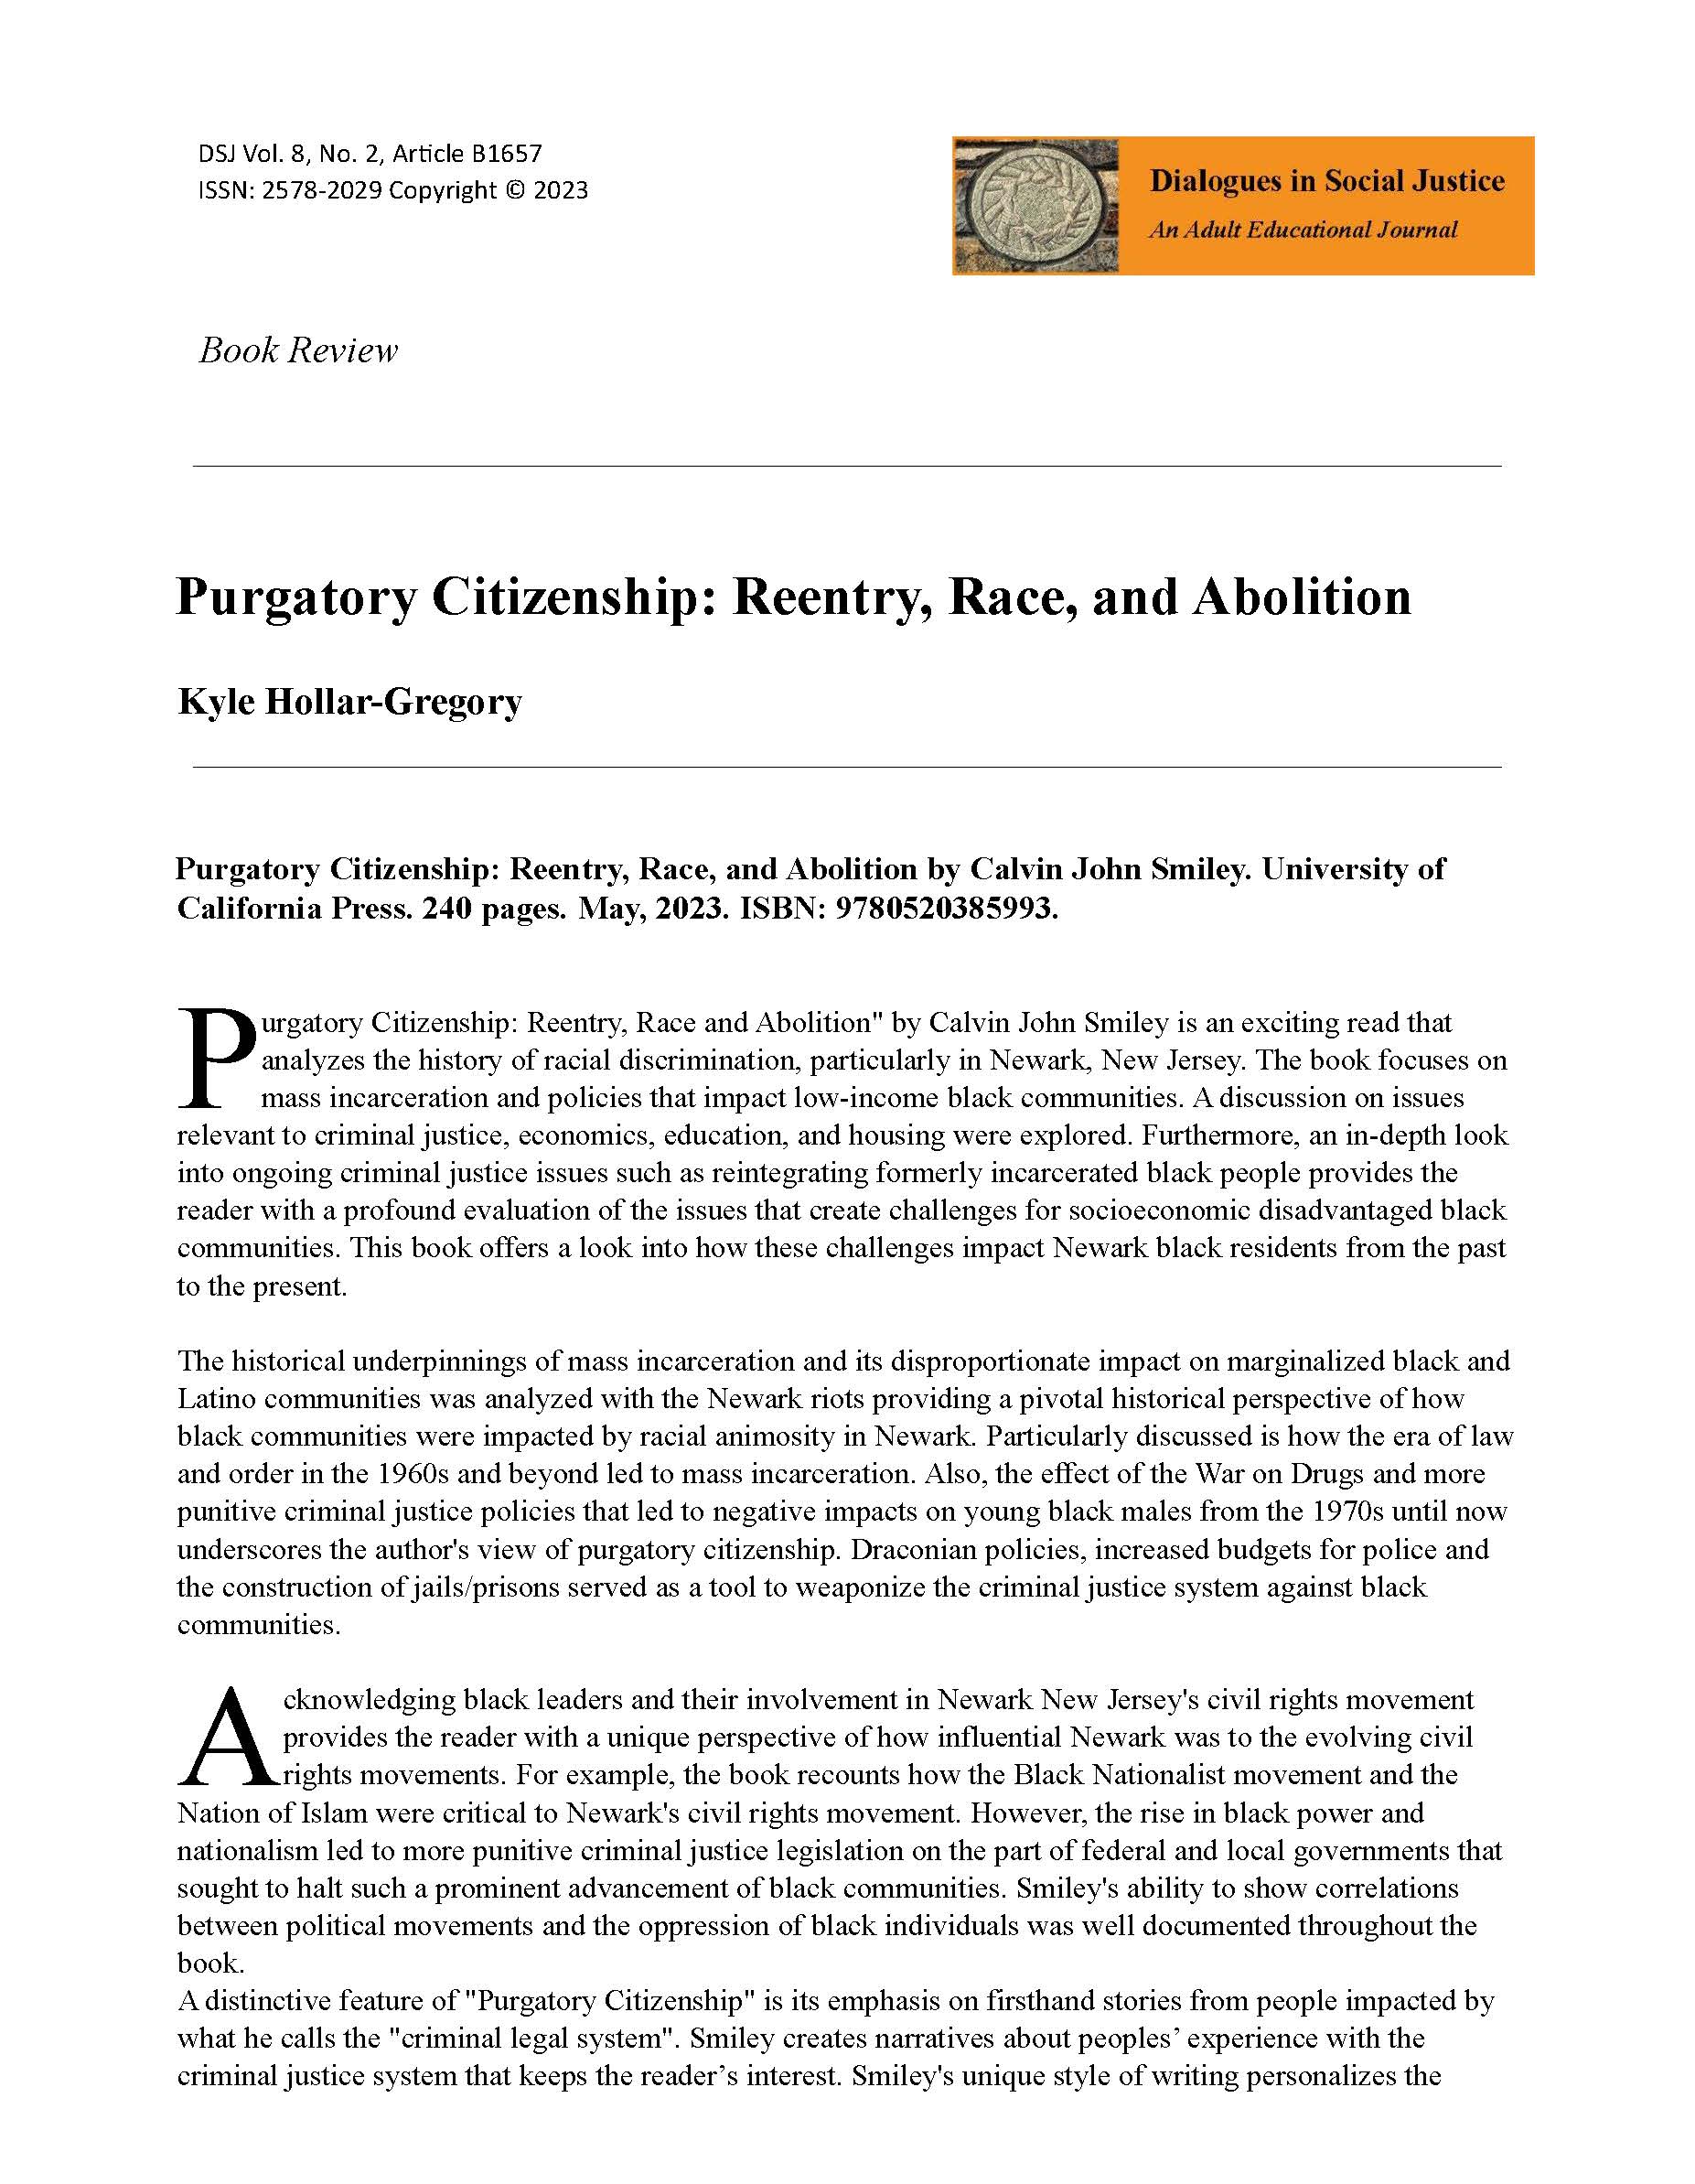 Review of Purgatory Citizenship: Reentry, Race, and Abolition